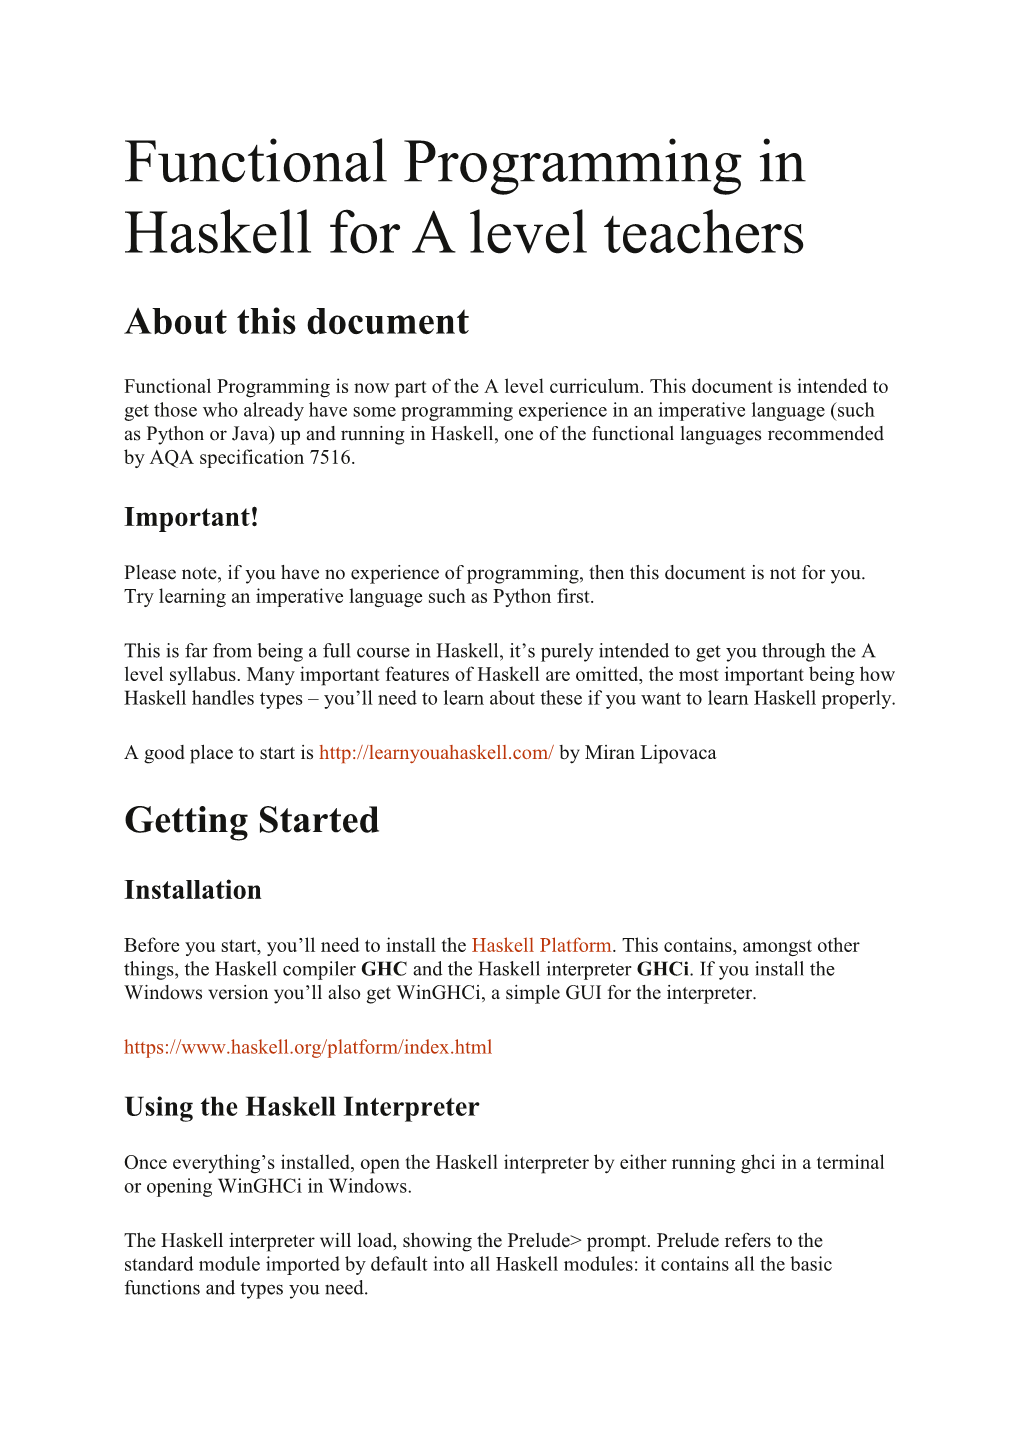 Functional Programming in Haskell for a Level Teachers About This Document